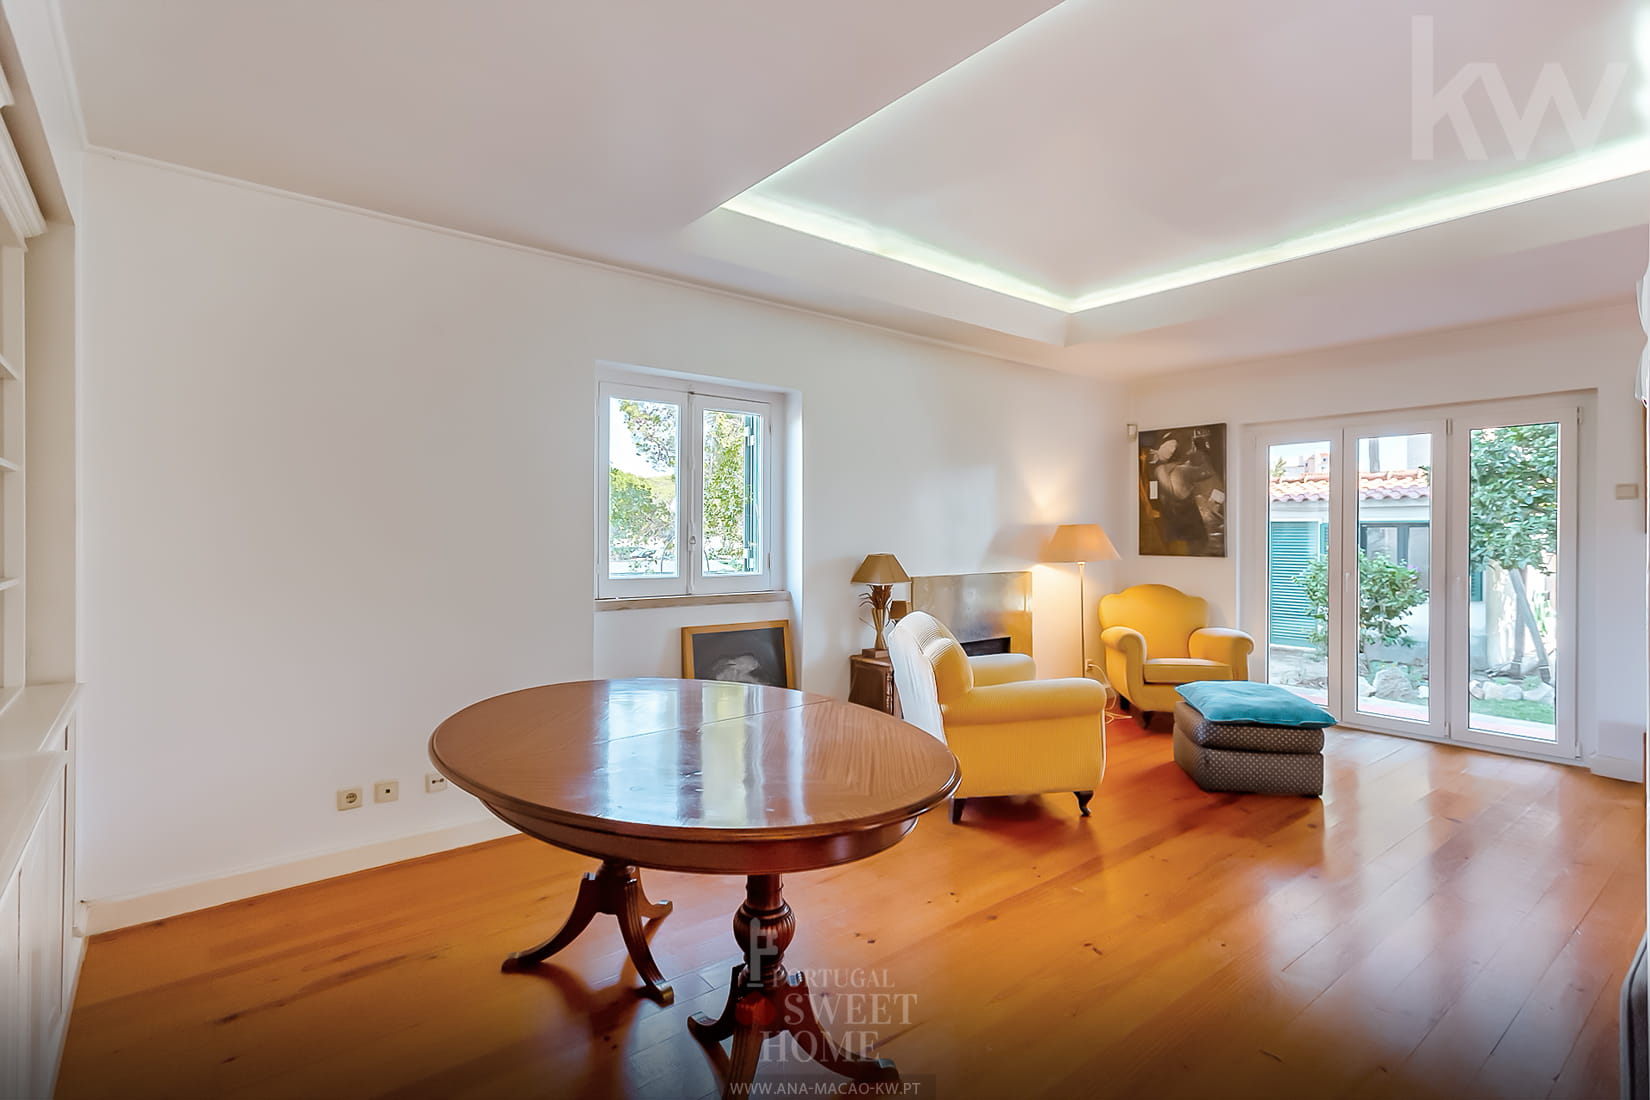 Chambre spacieuse et lumineuse (43,9 m²)